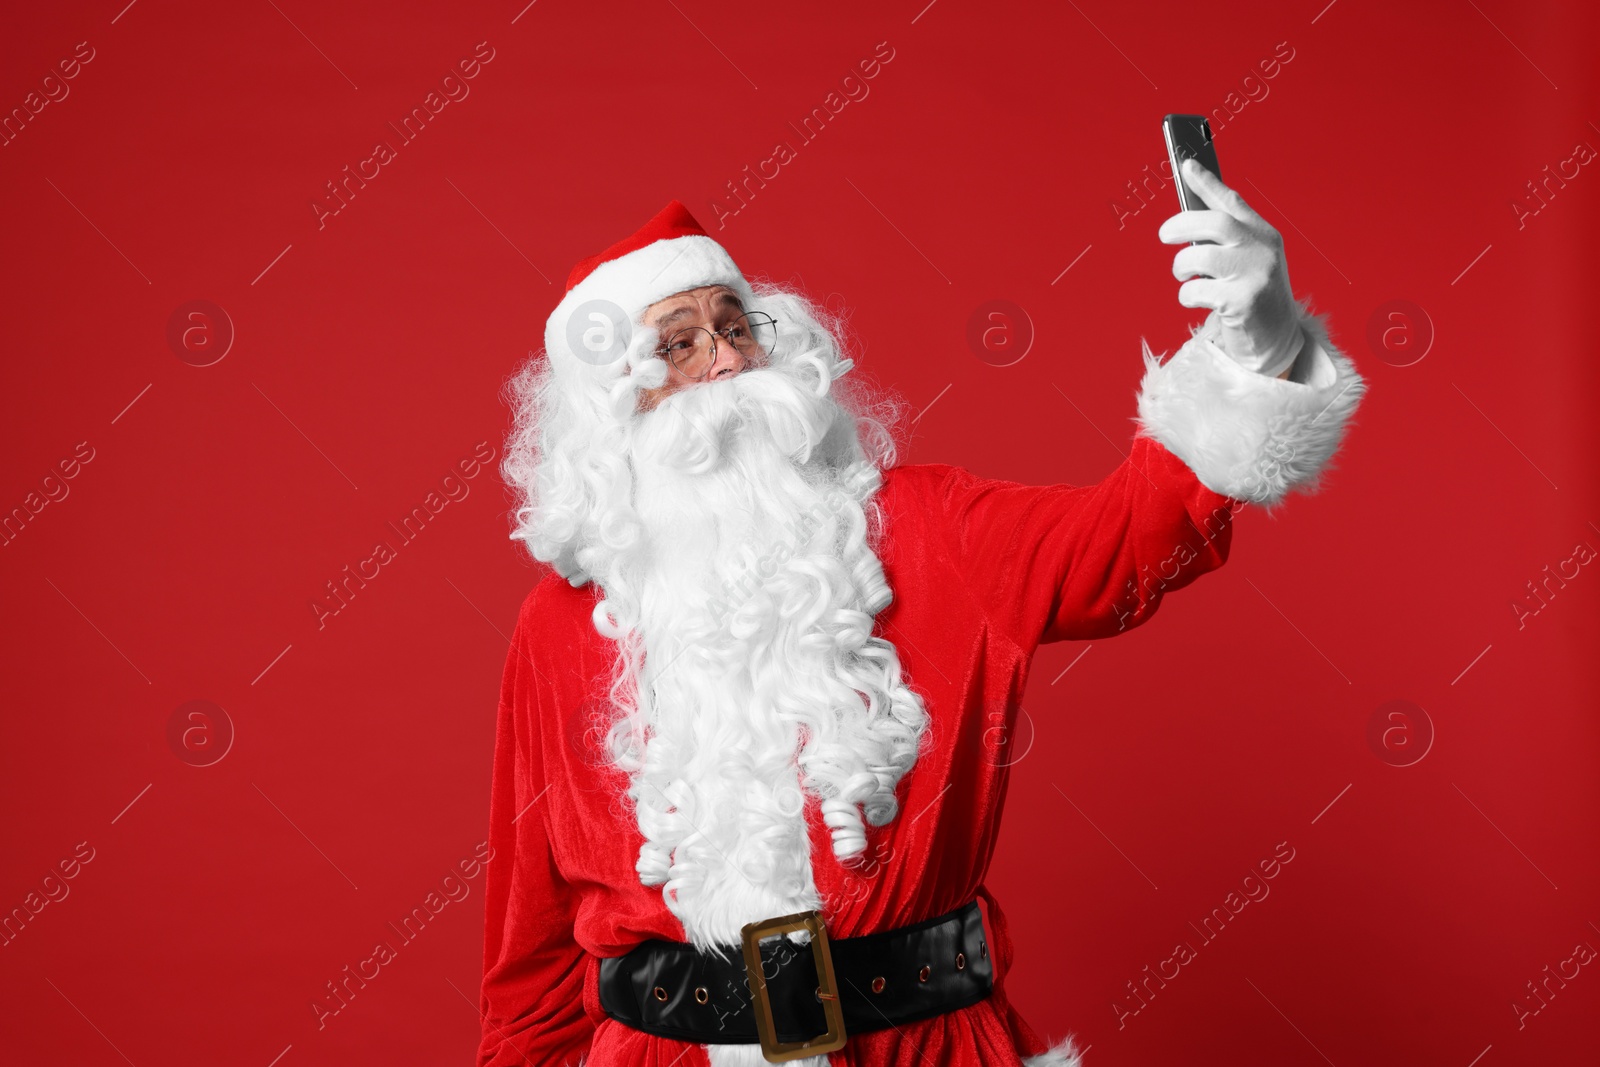 Photo of Merry Christmas. Santa Claus taking selfie on red background